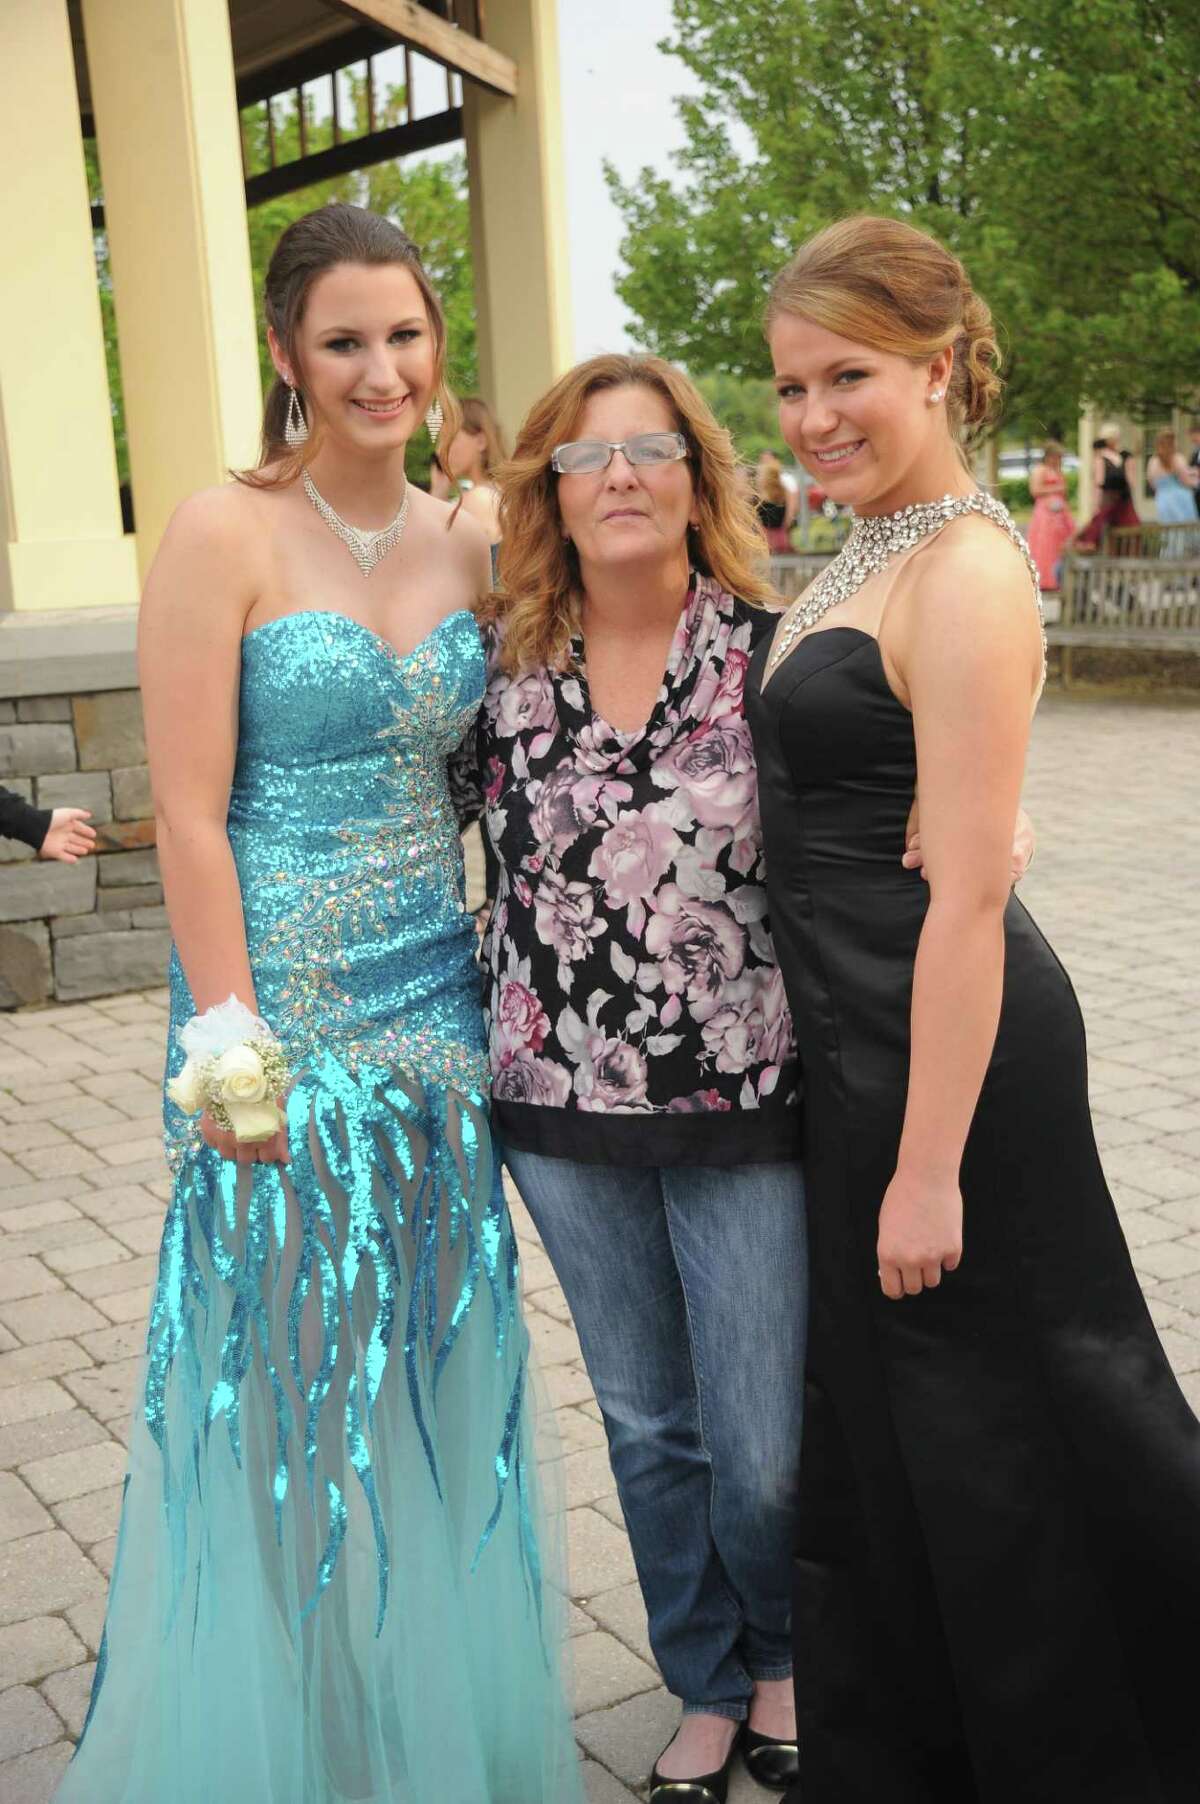 Were you Seen at the Colonie Central High School Junior Prom photo shoot at The Crossings in Colonie on Saturday, May 16, 2015?